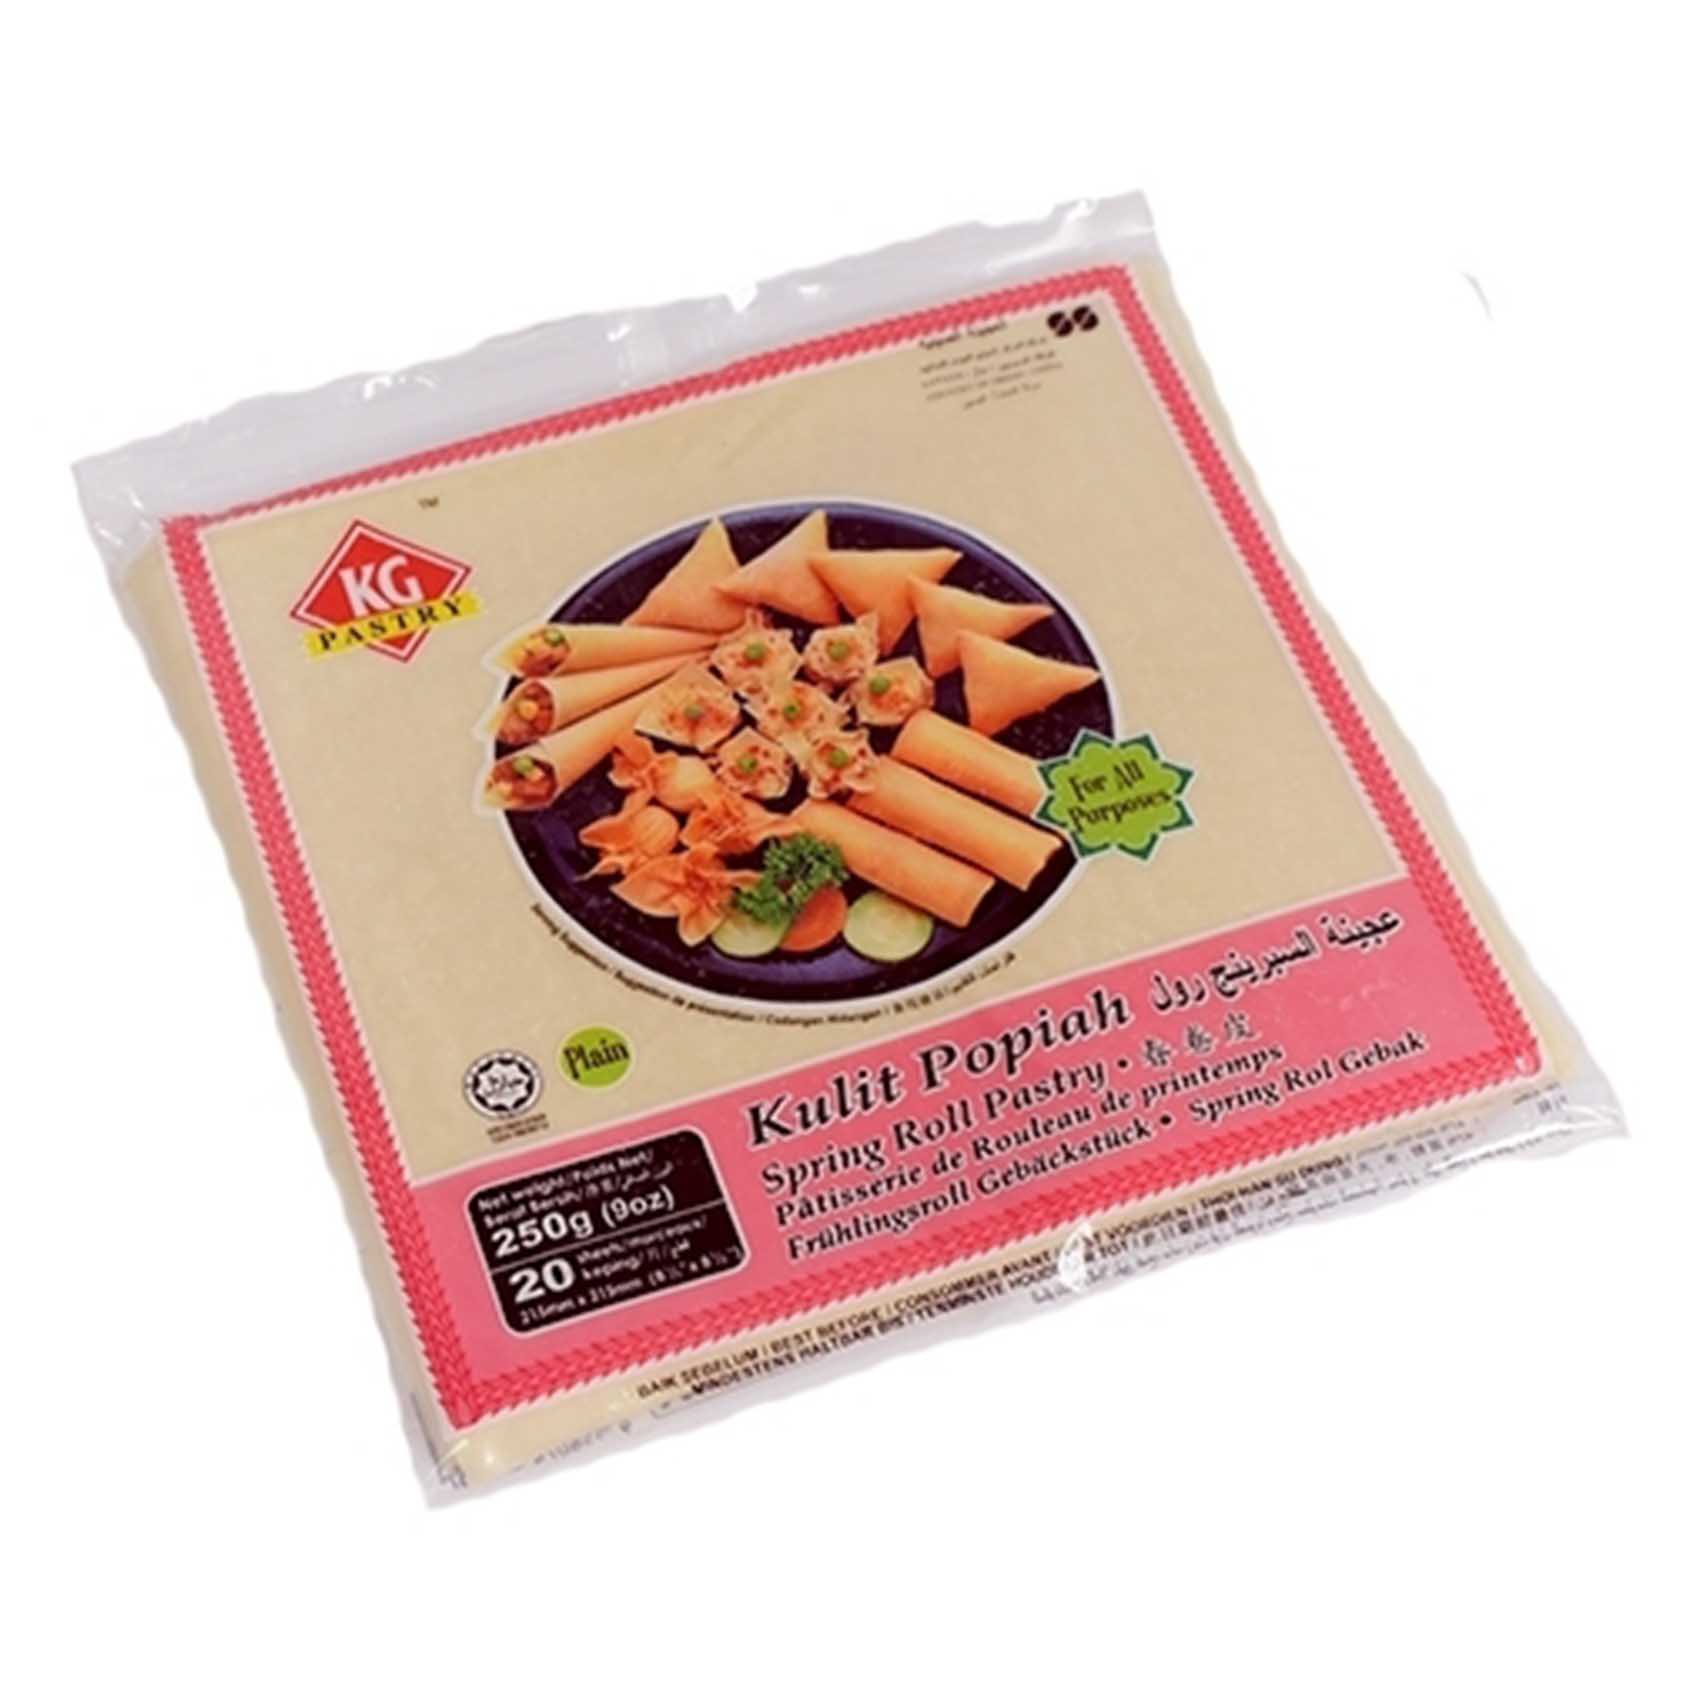 KG Spring Roll Pastry 250g